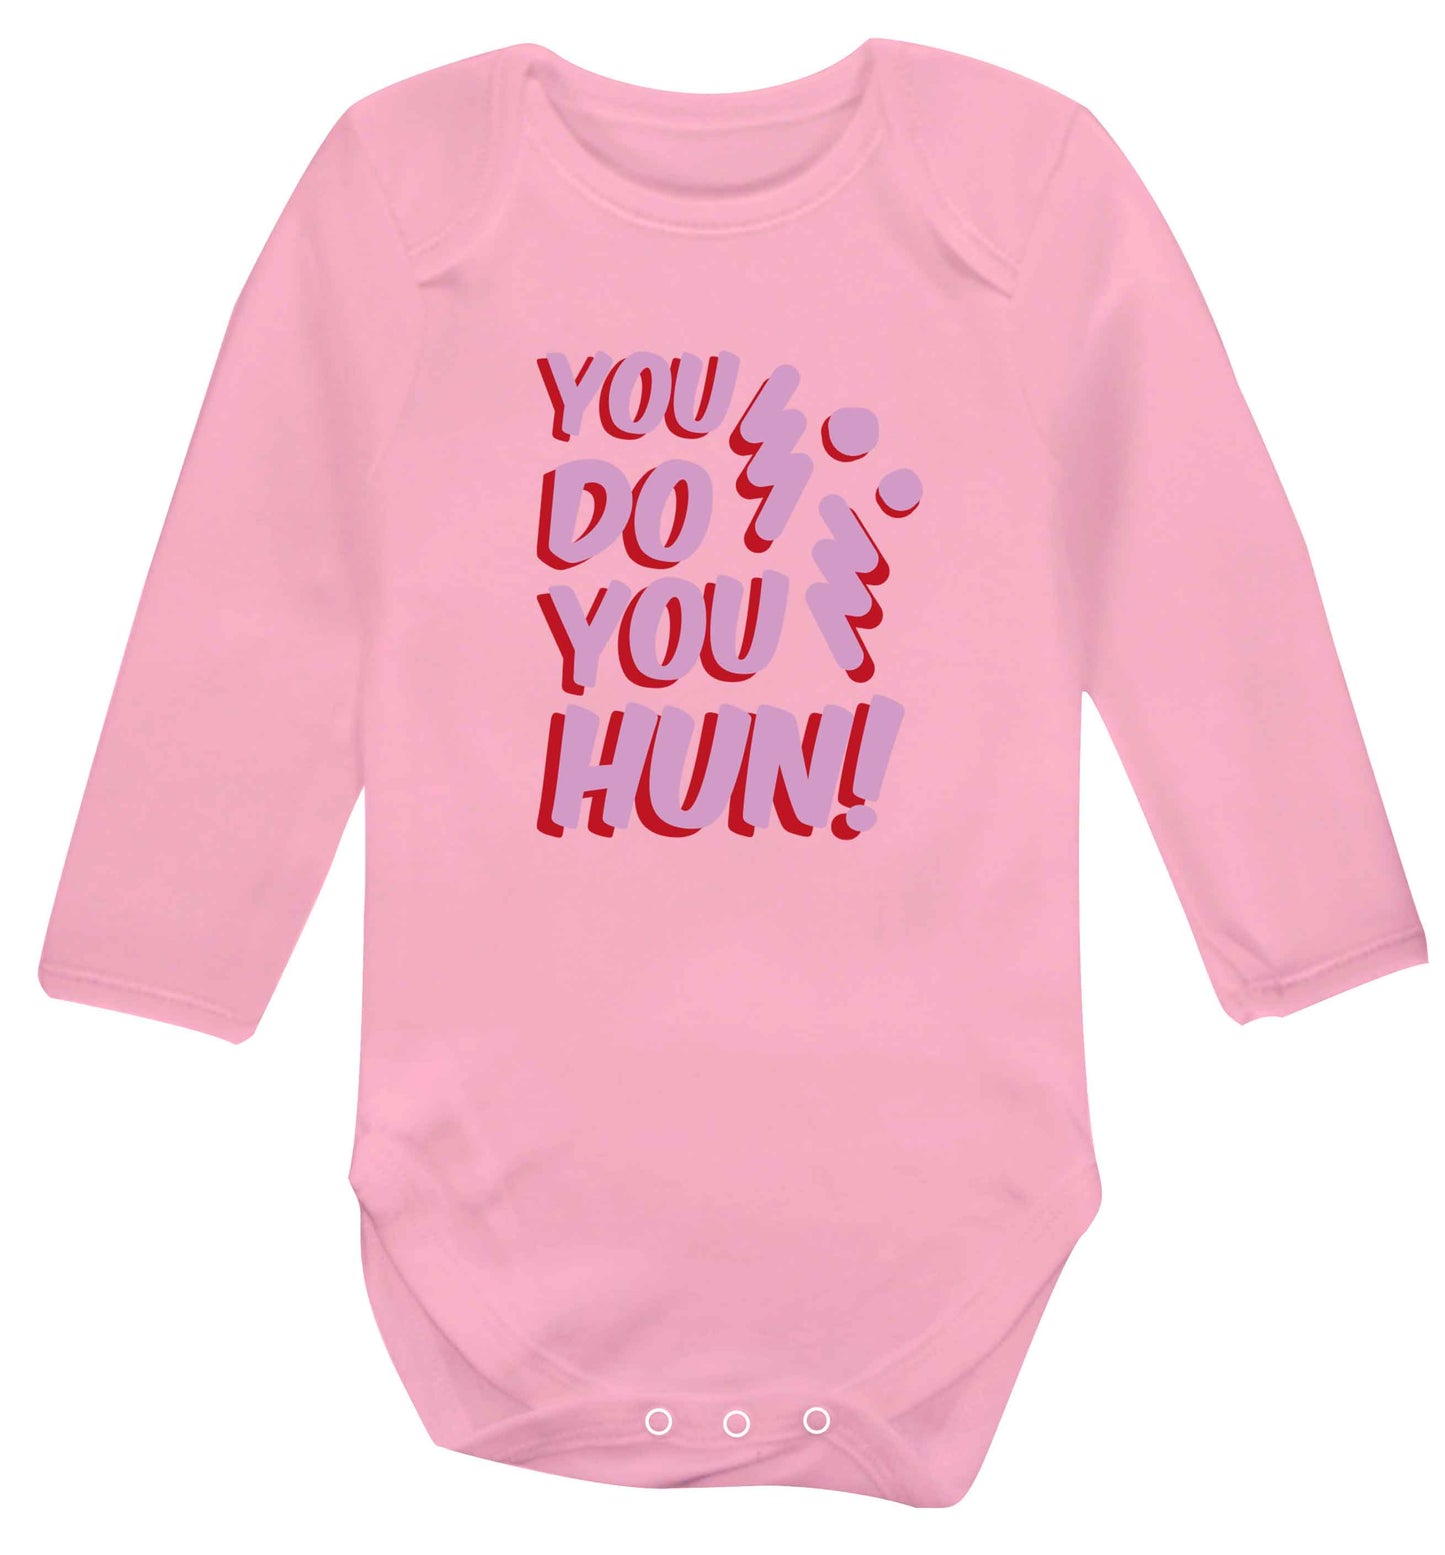 You do you hun baby vest long sleeved pale pink 6-12 months